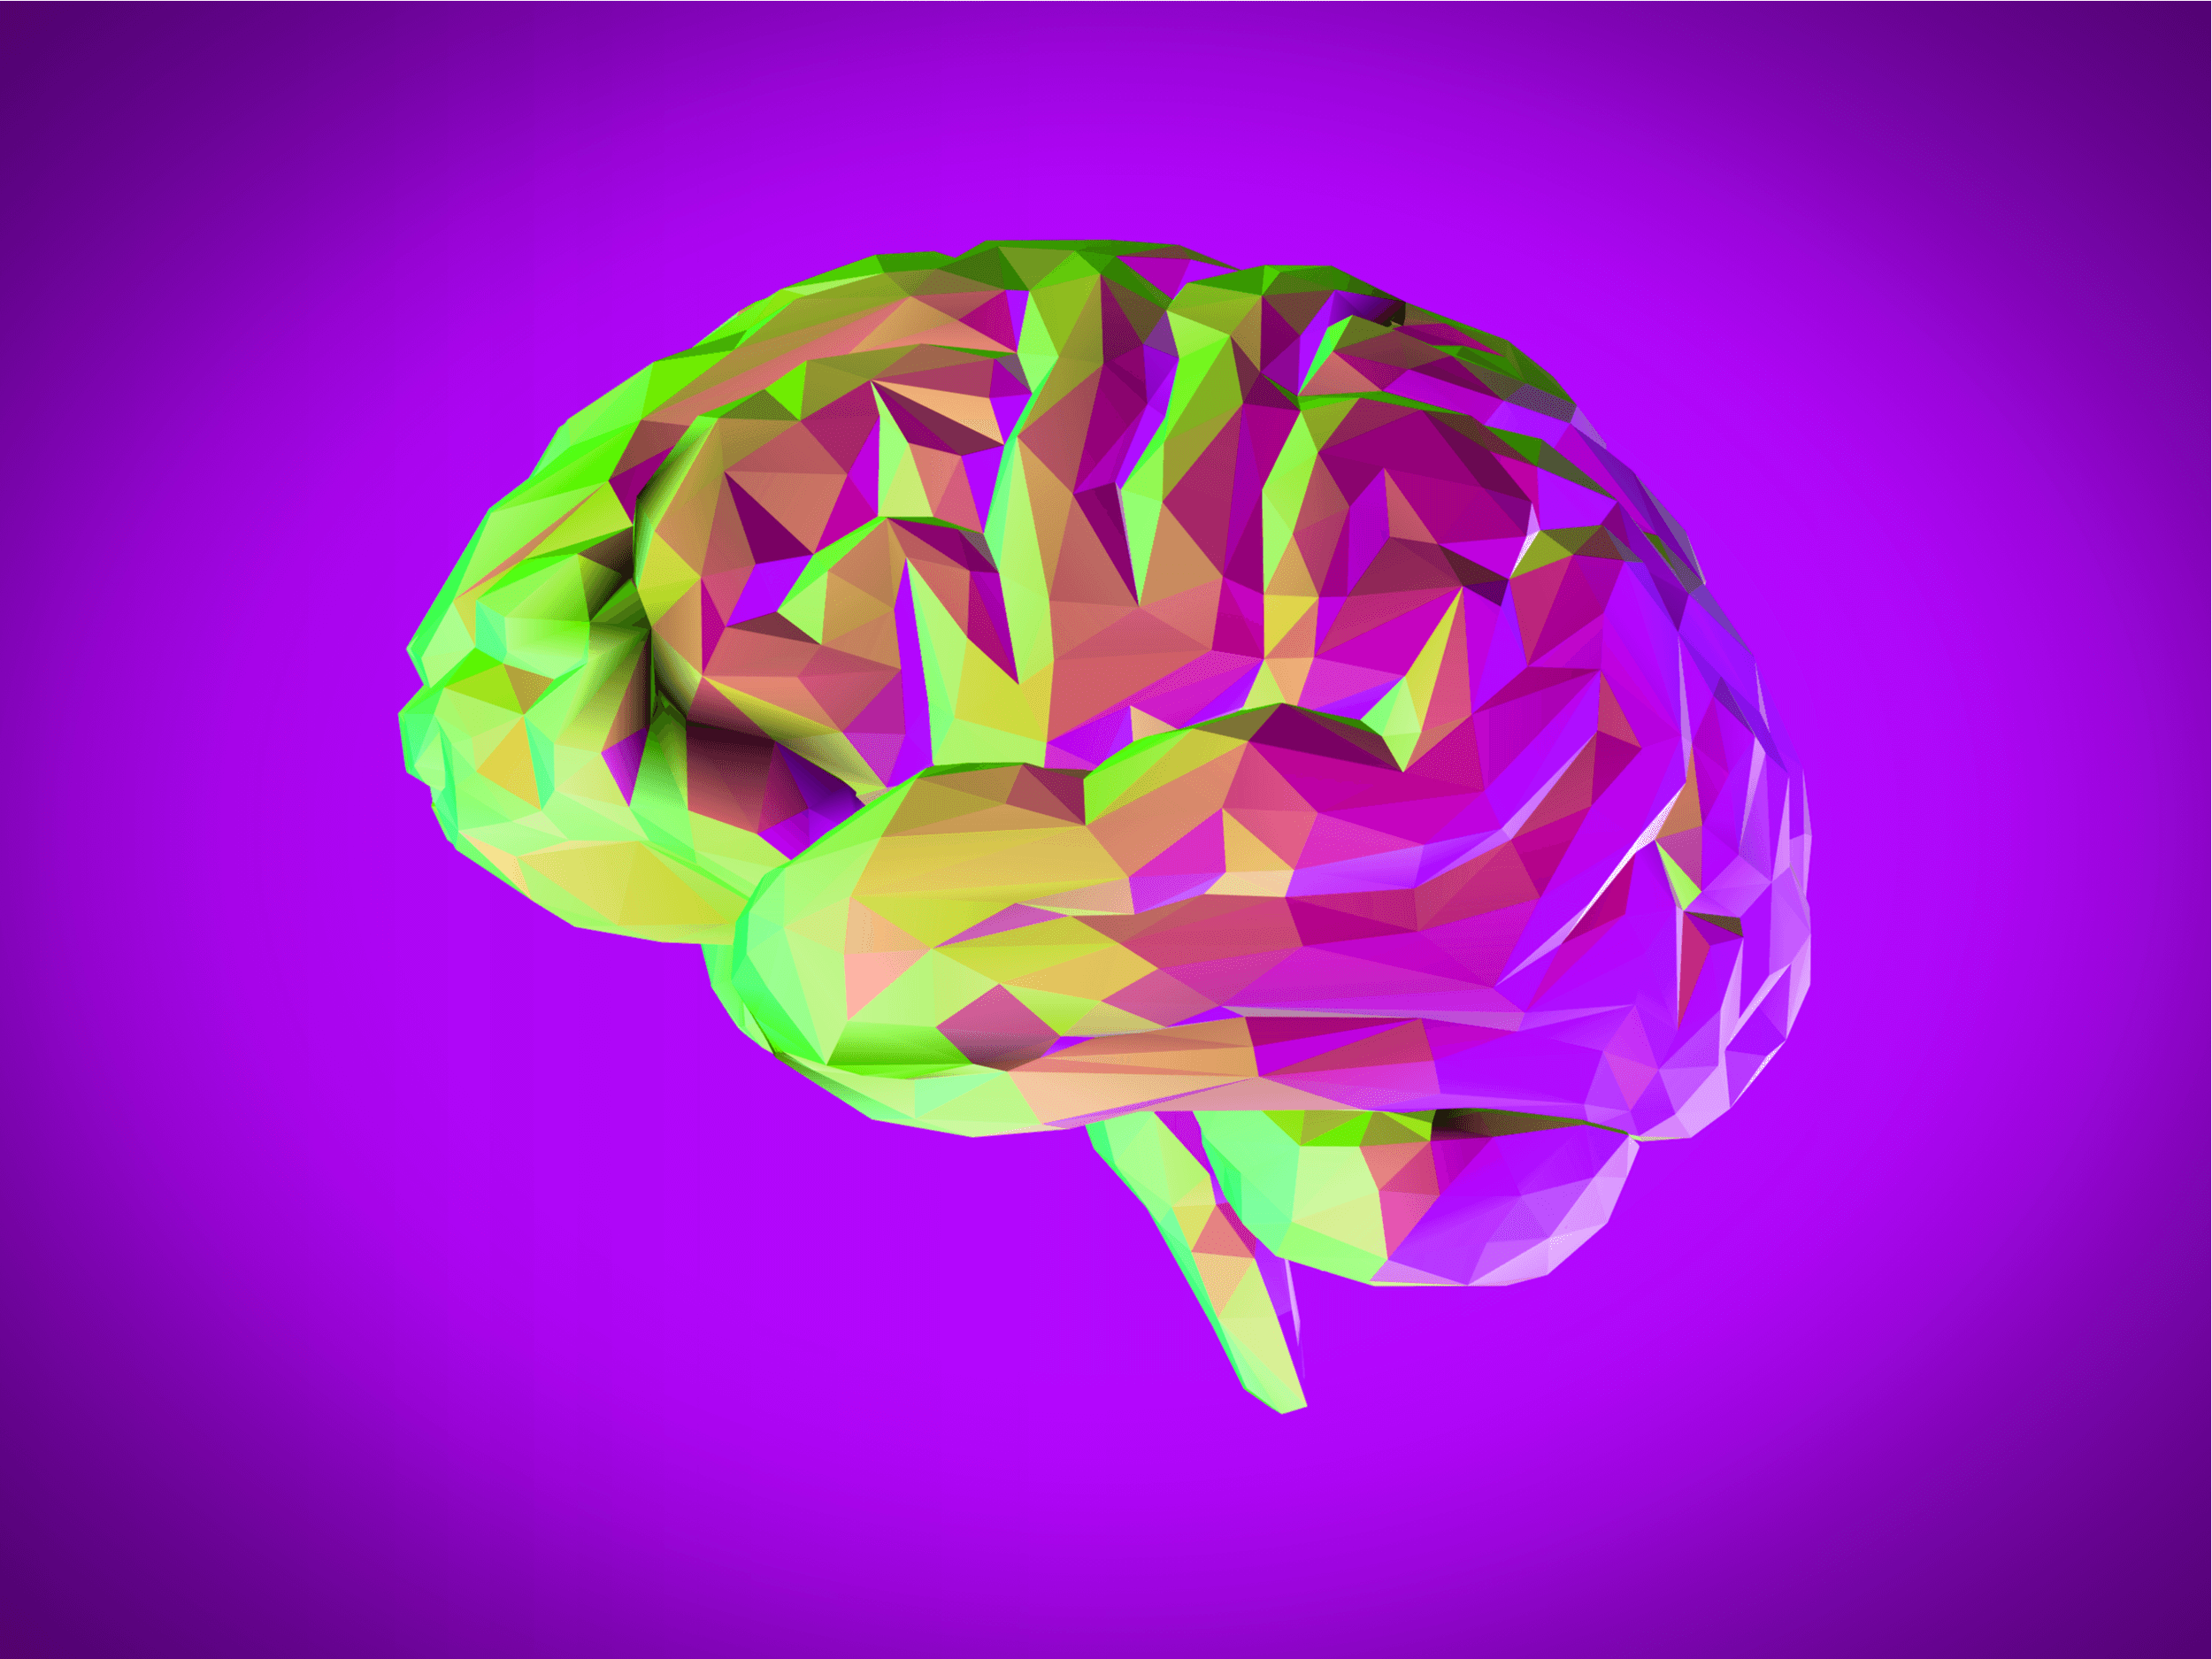 Colorful low poly side view brain illustration isolated on blue background